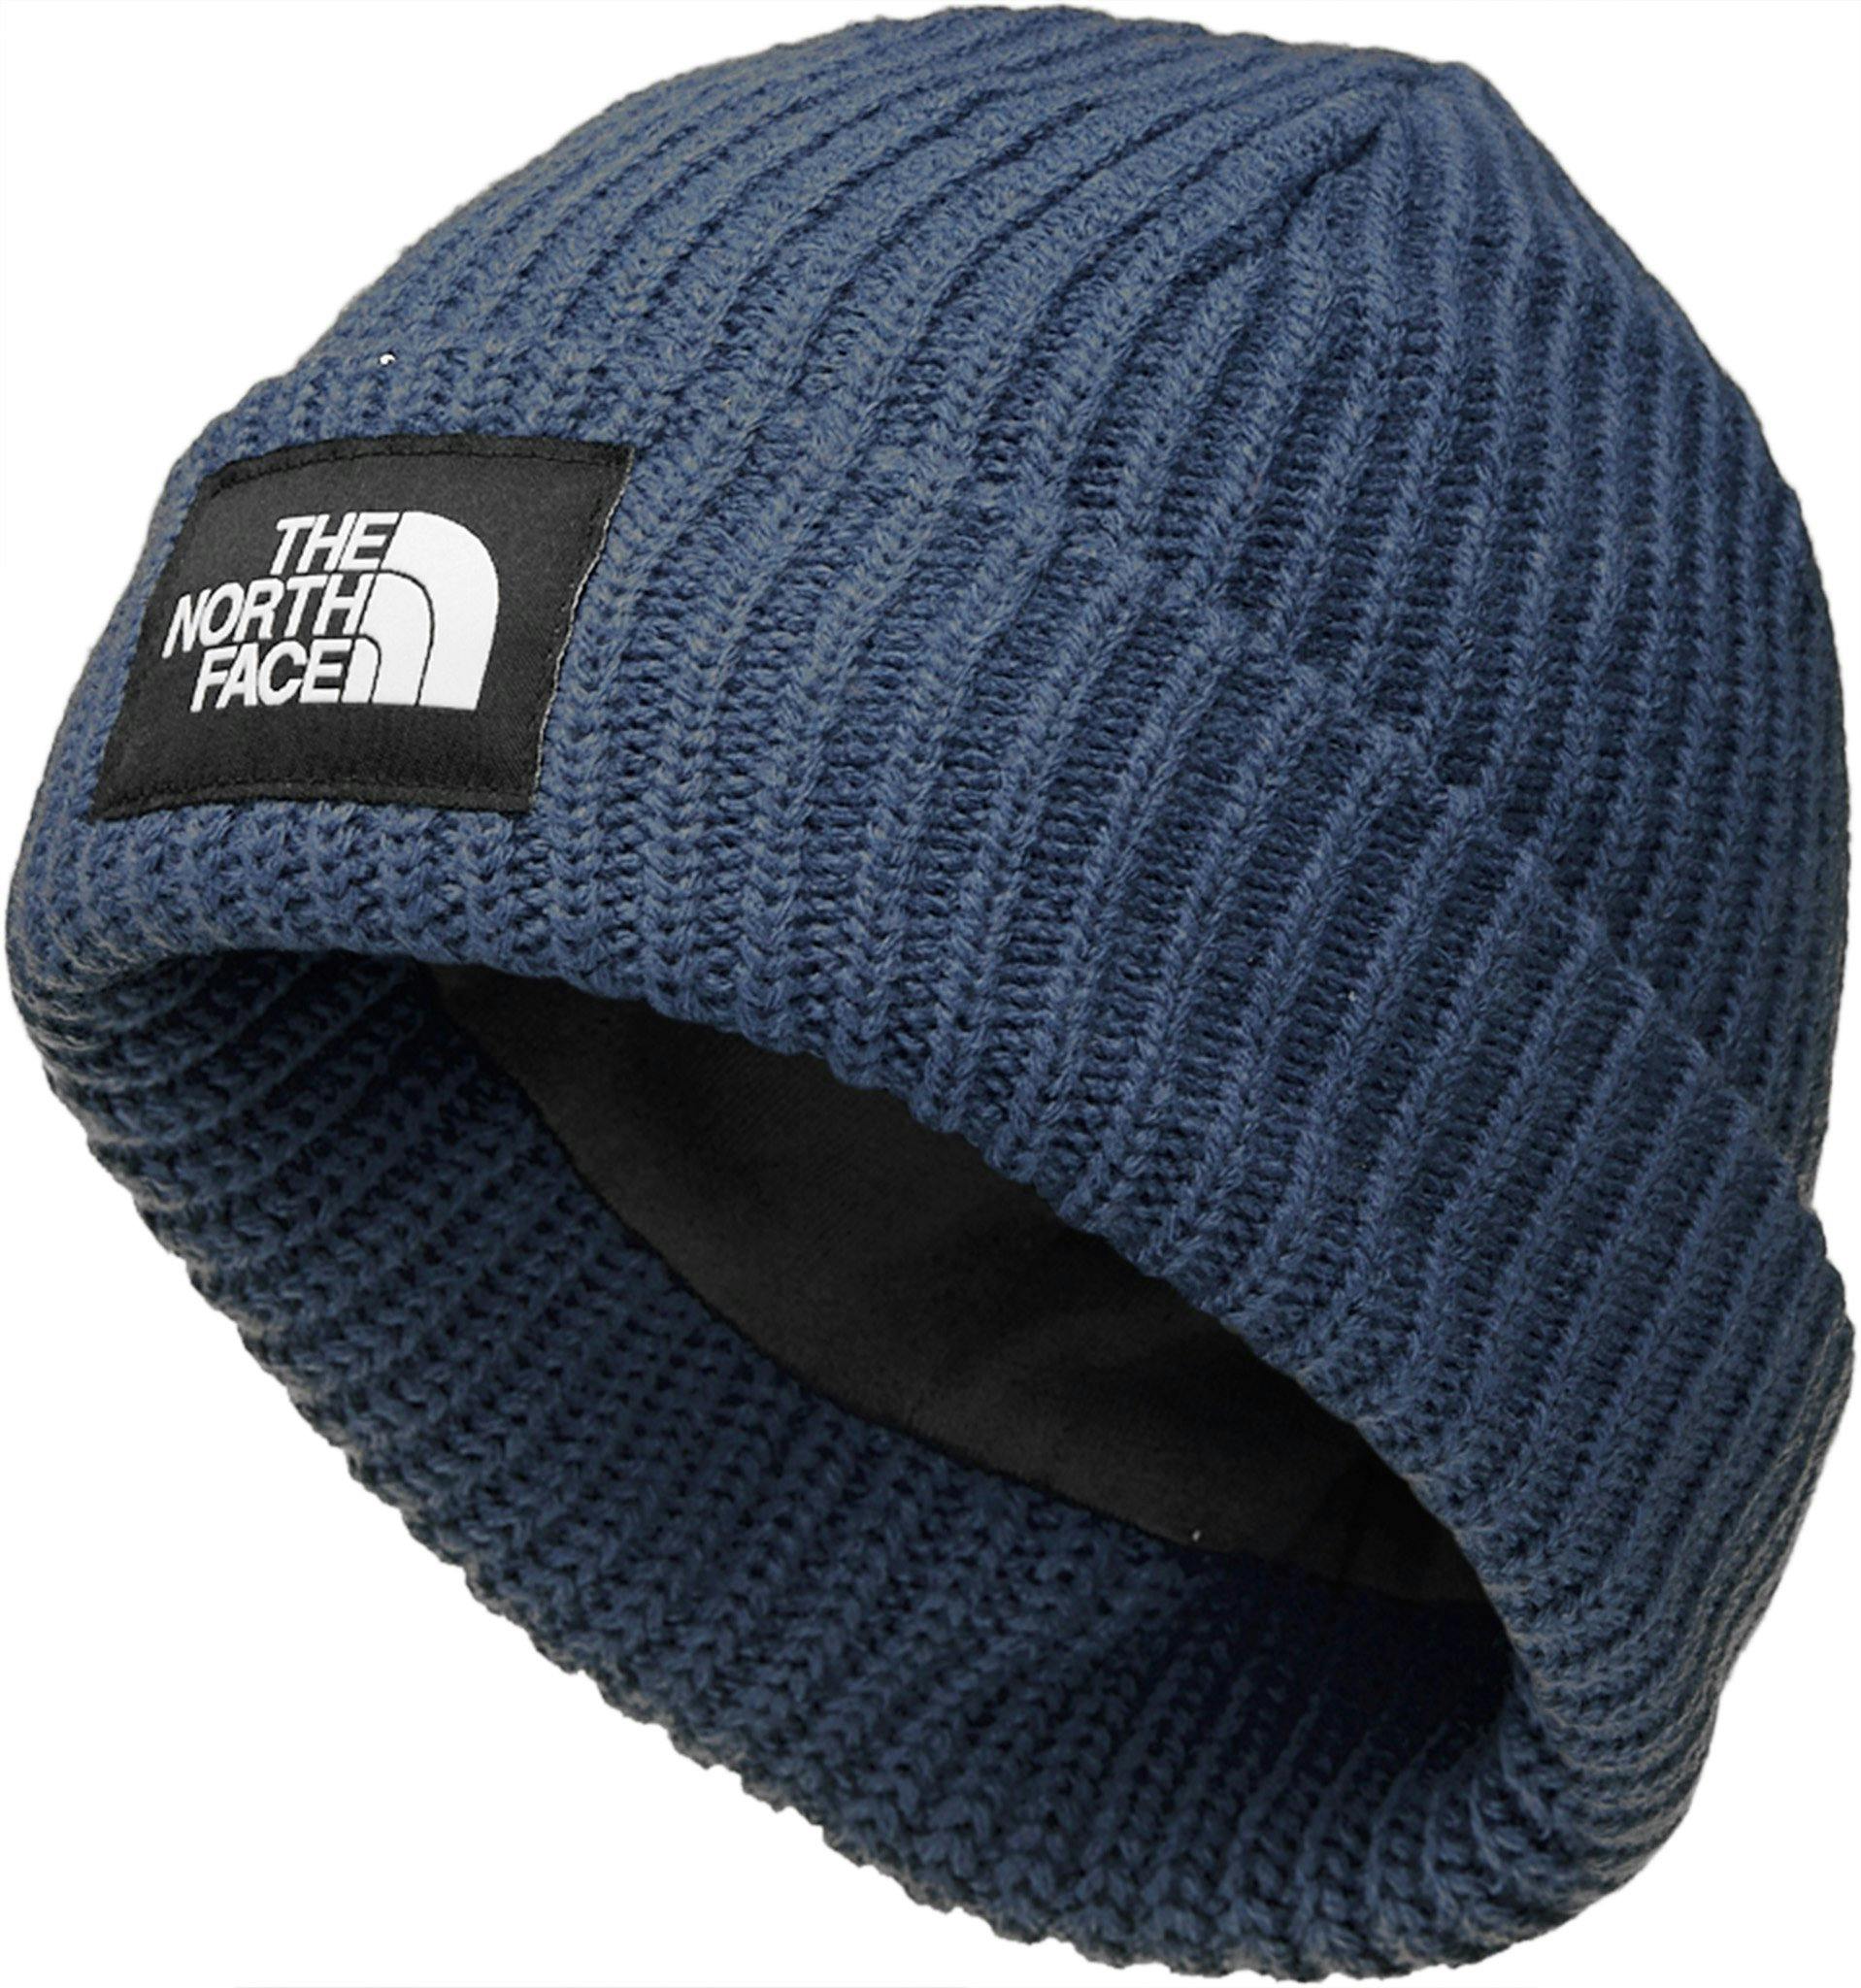 Product image for Salty Dog Beanie - Kids